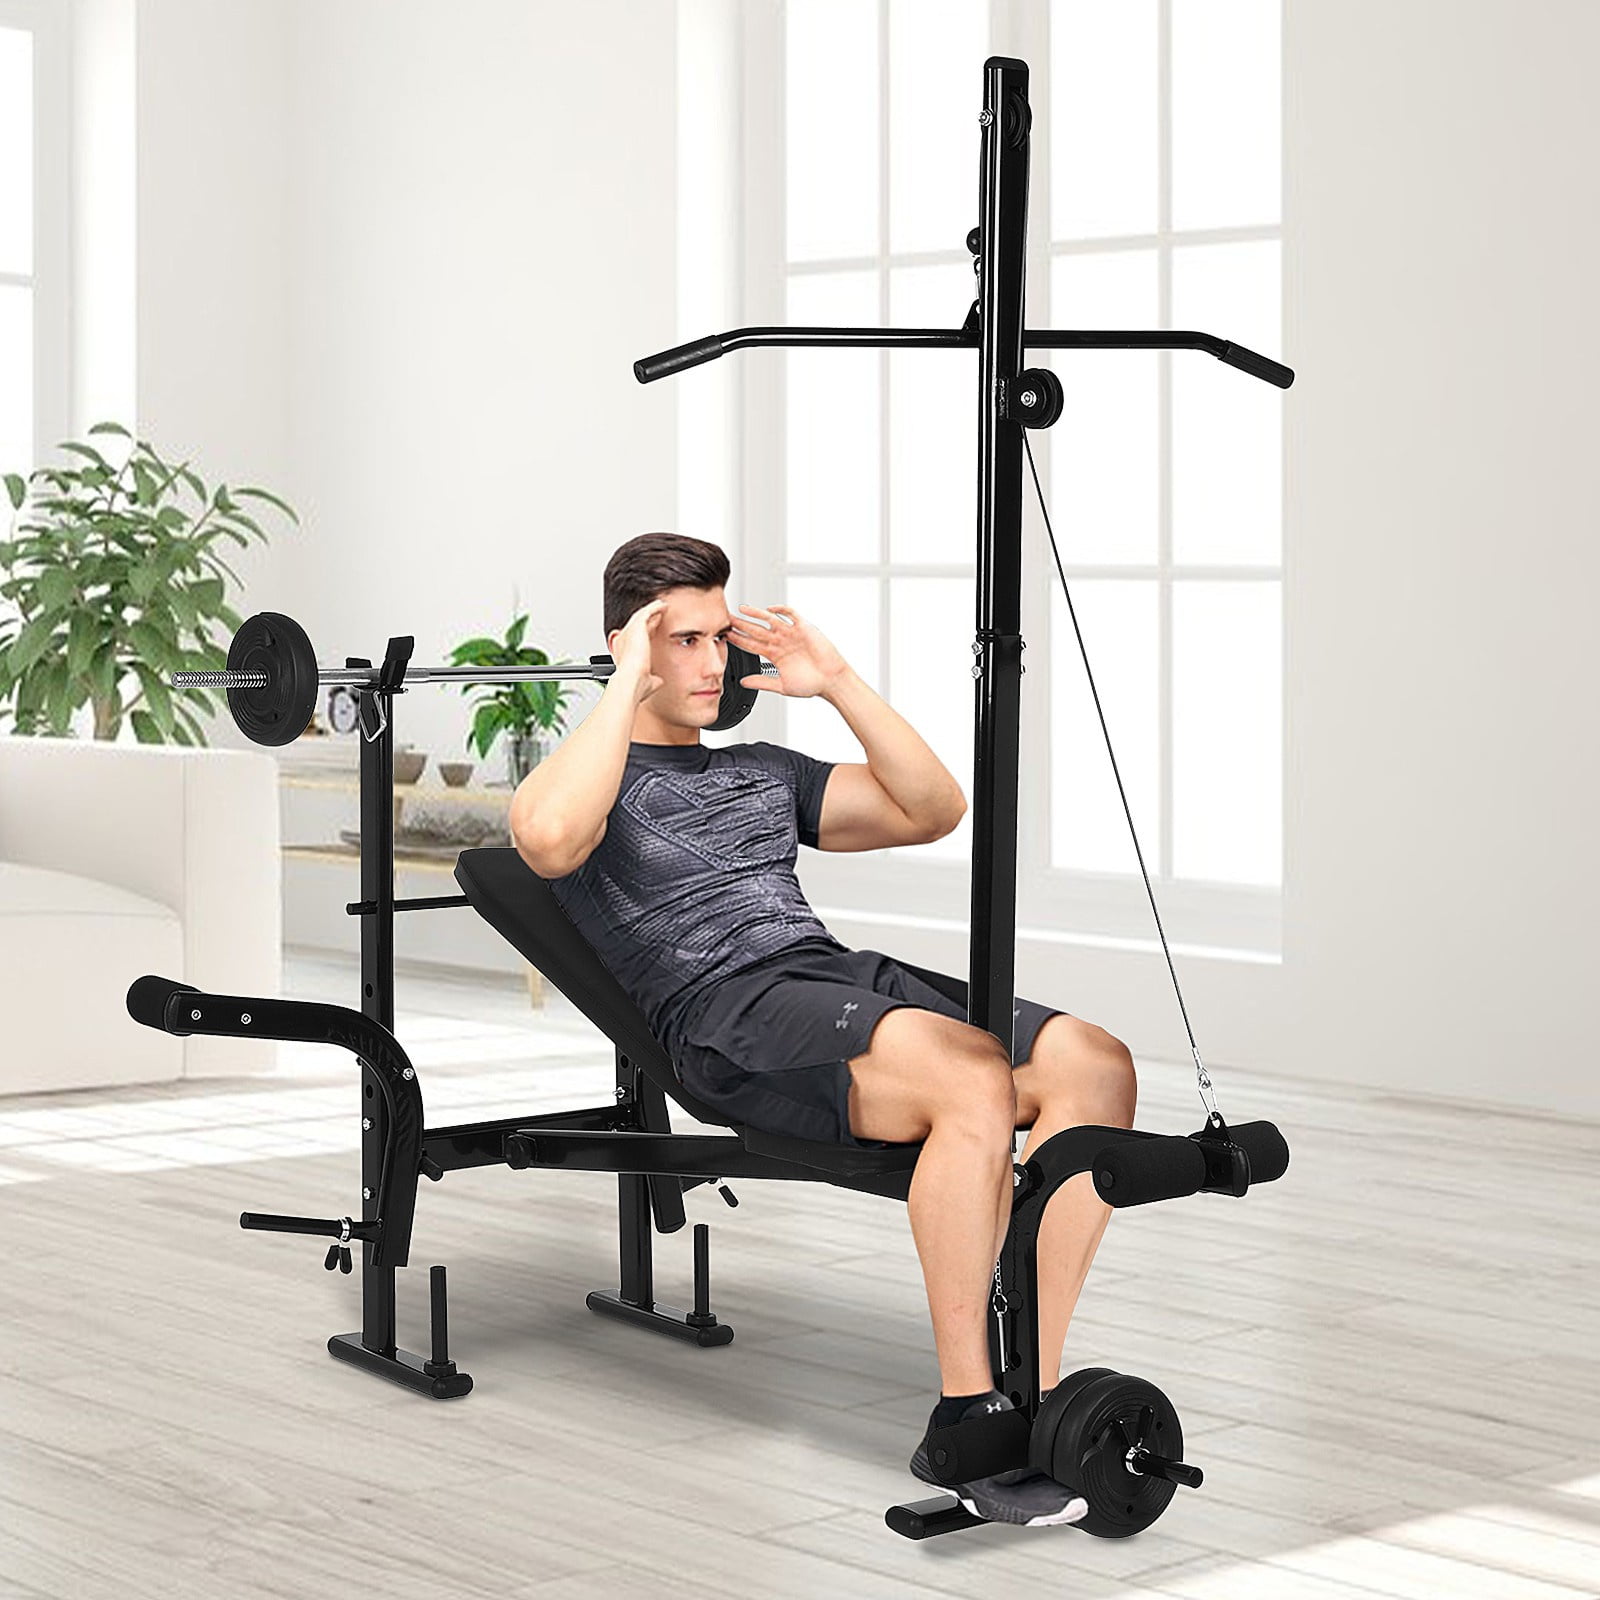 Details about   Folding Adjustable Bench & Squat Rack Dumbbell Weight Bench Barbell Lifting US 